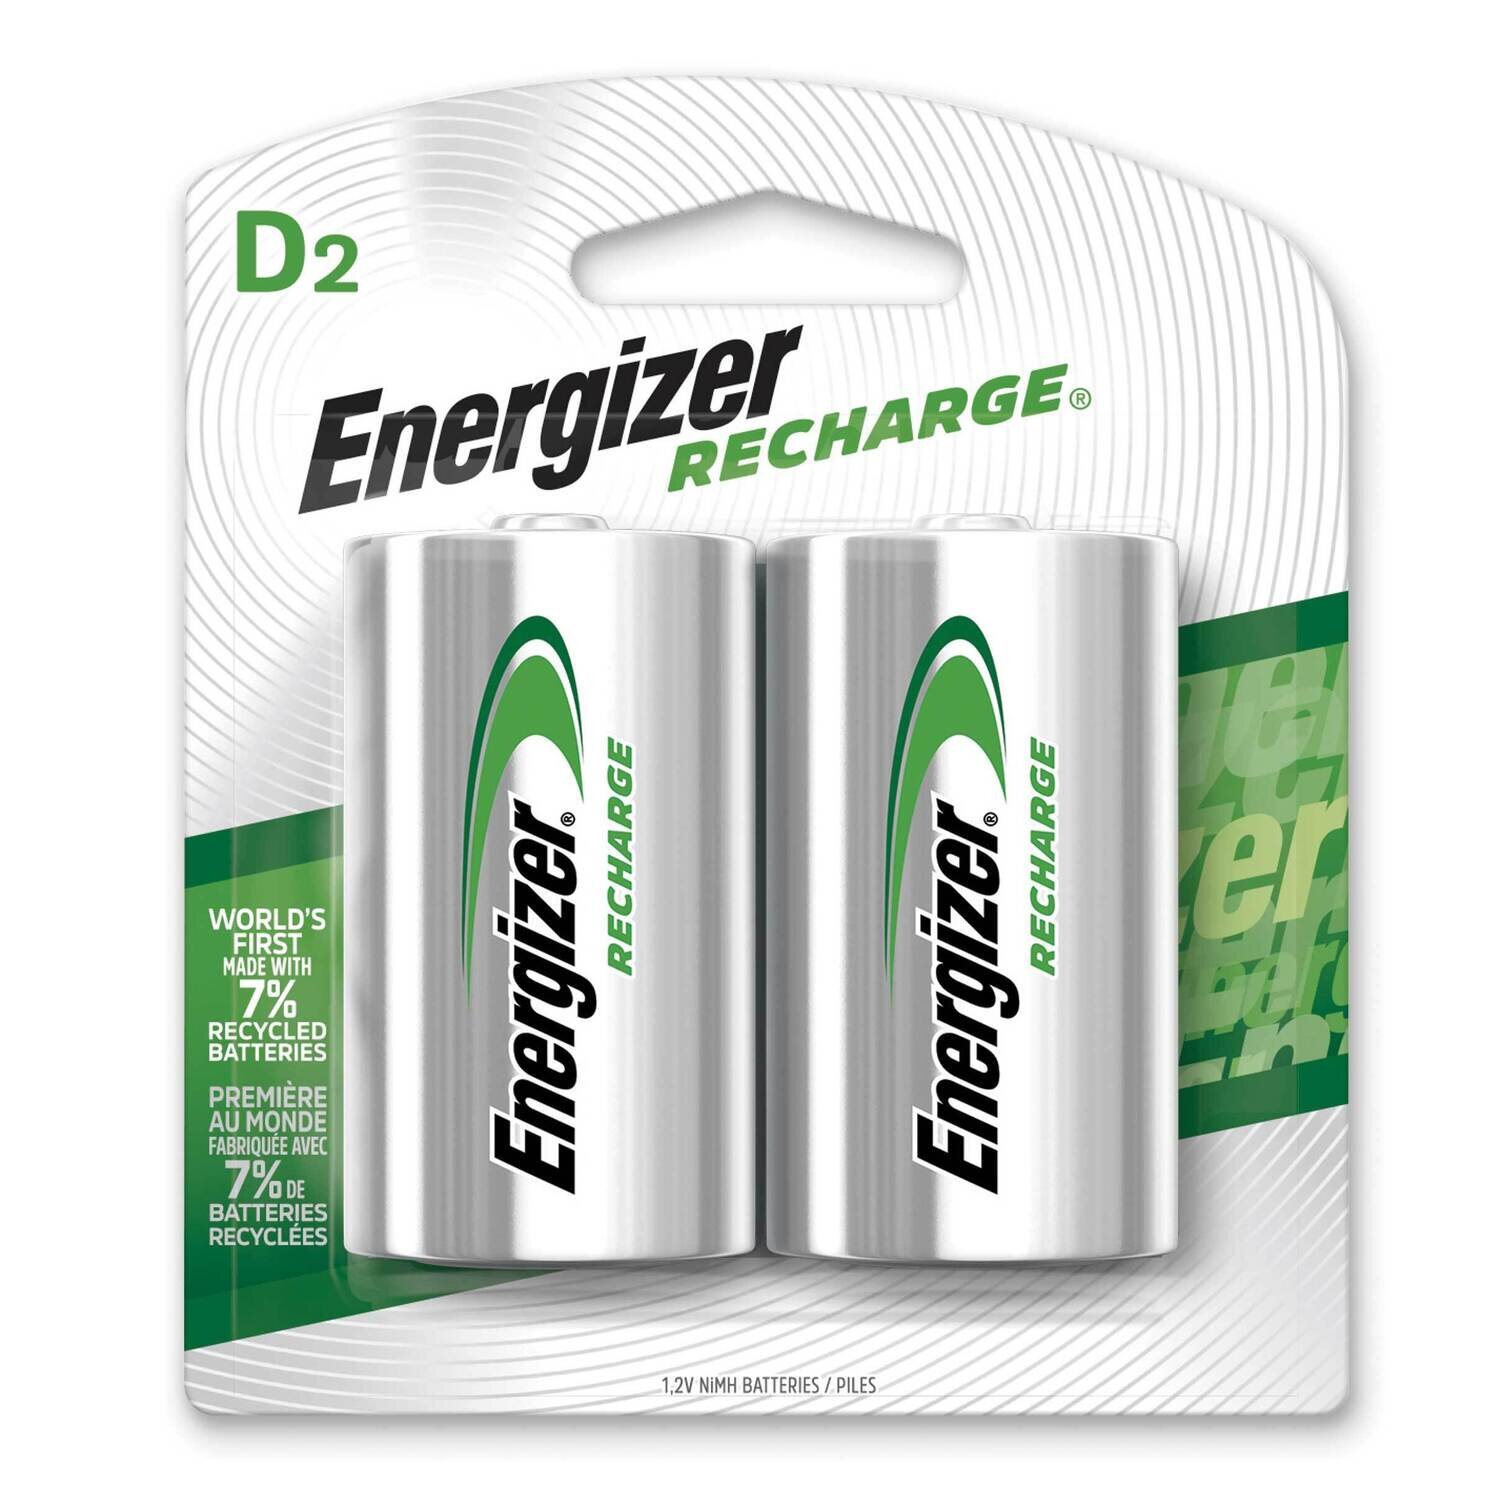 Energizer Recharge Universal Rechargeable D Batteries Pack of 2 WBDR/2